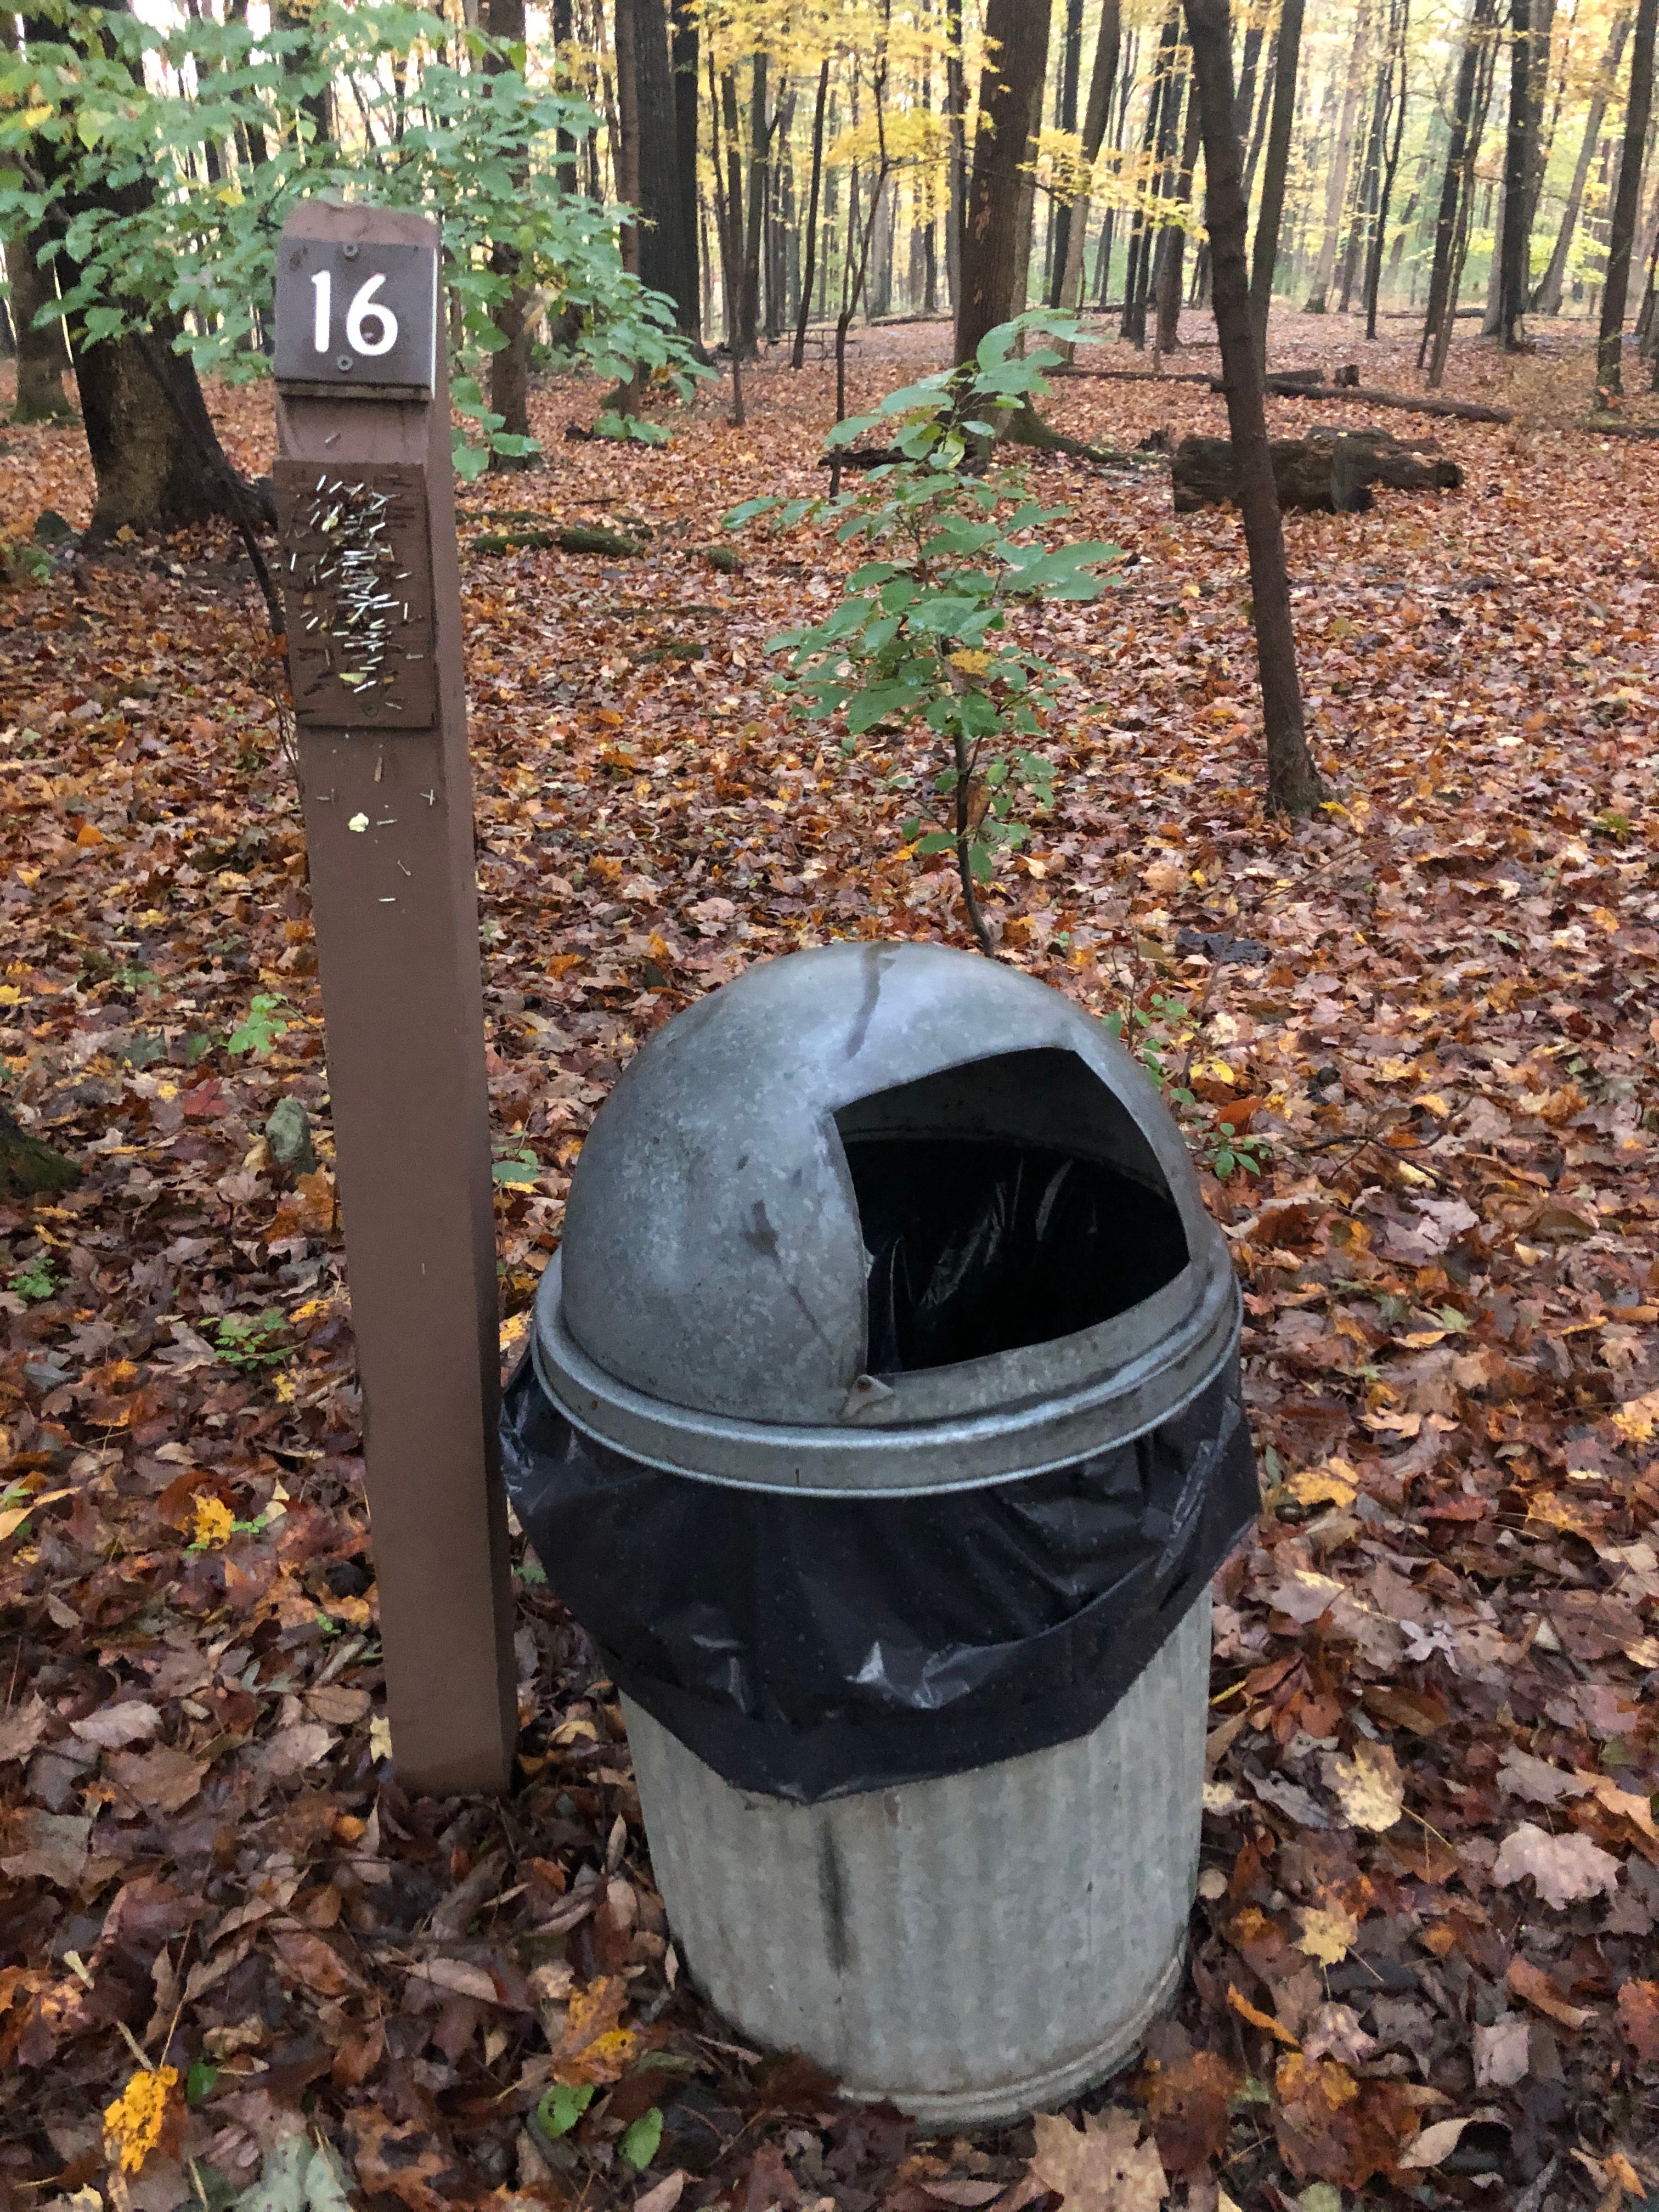 Each site had their own garbage can